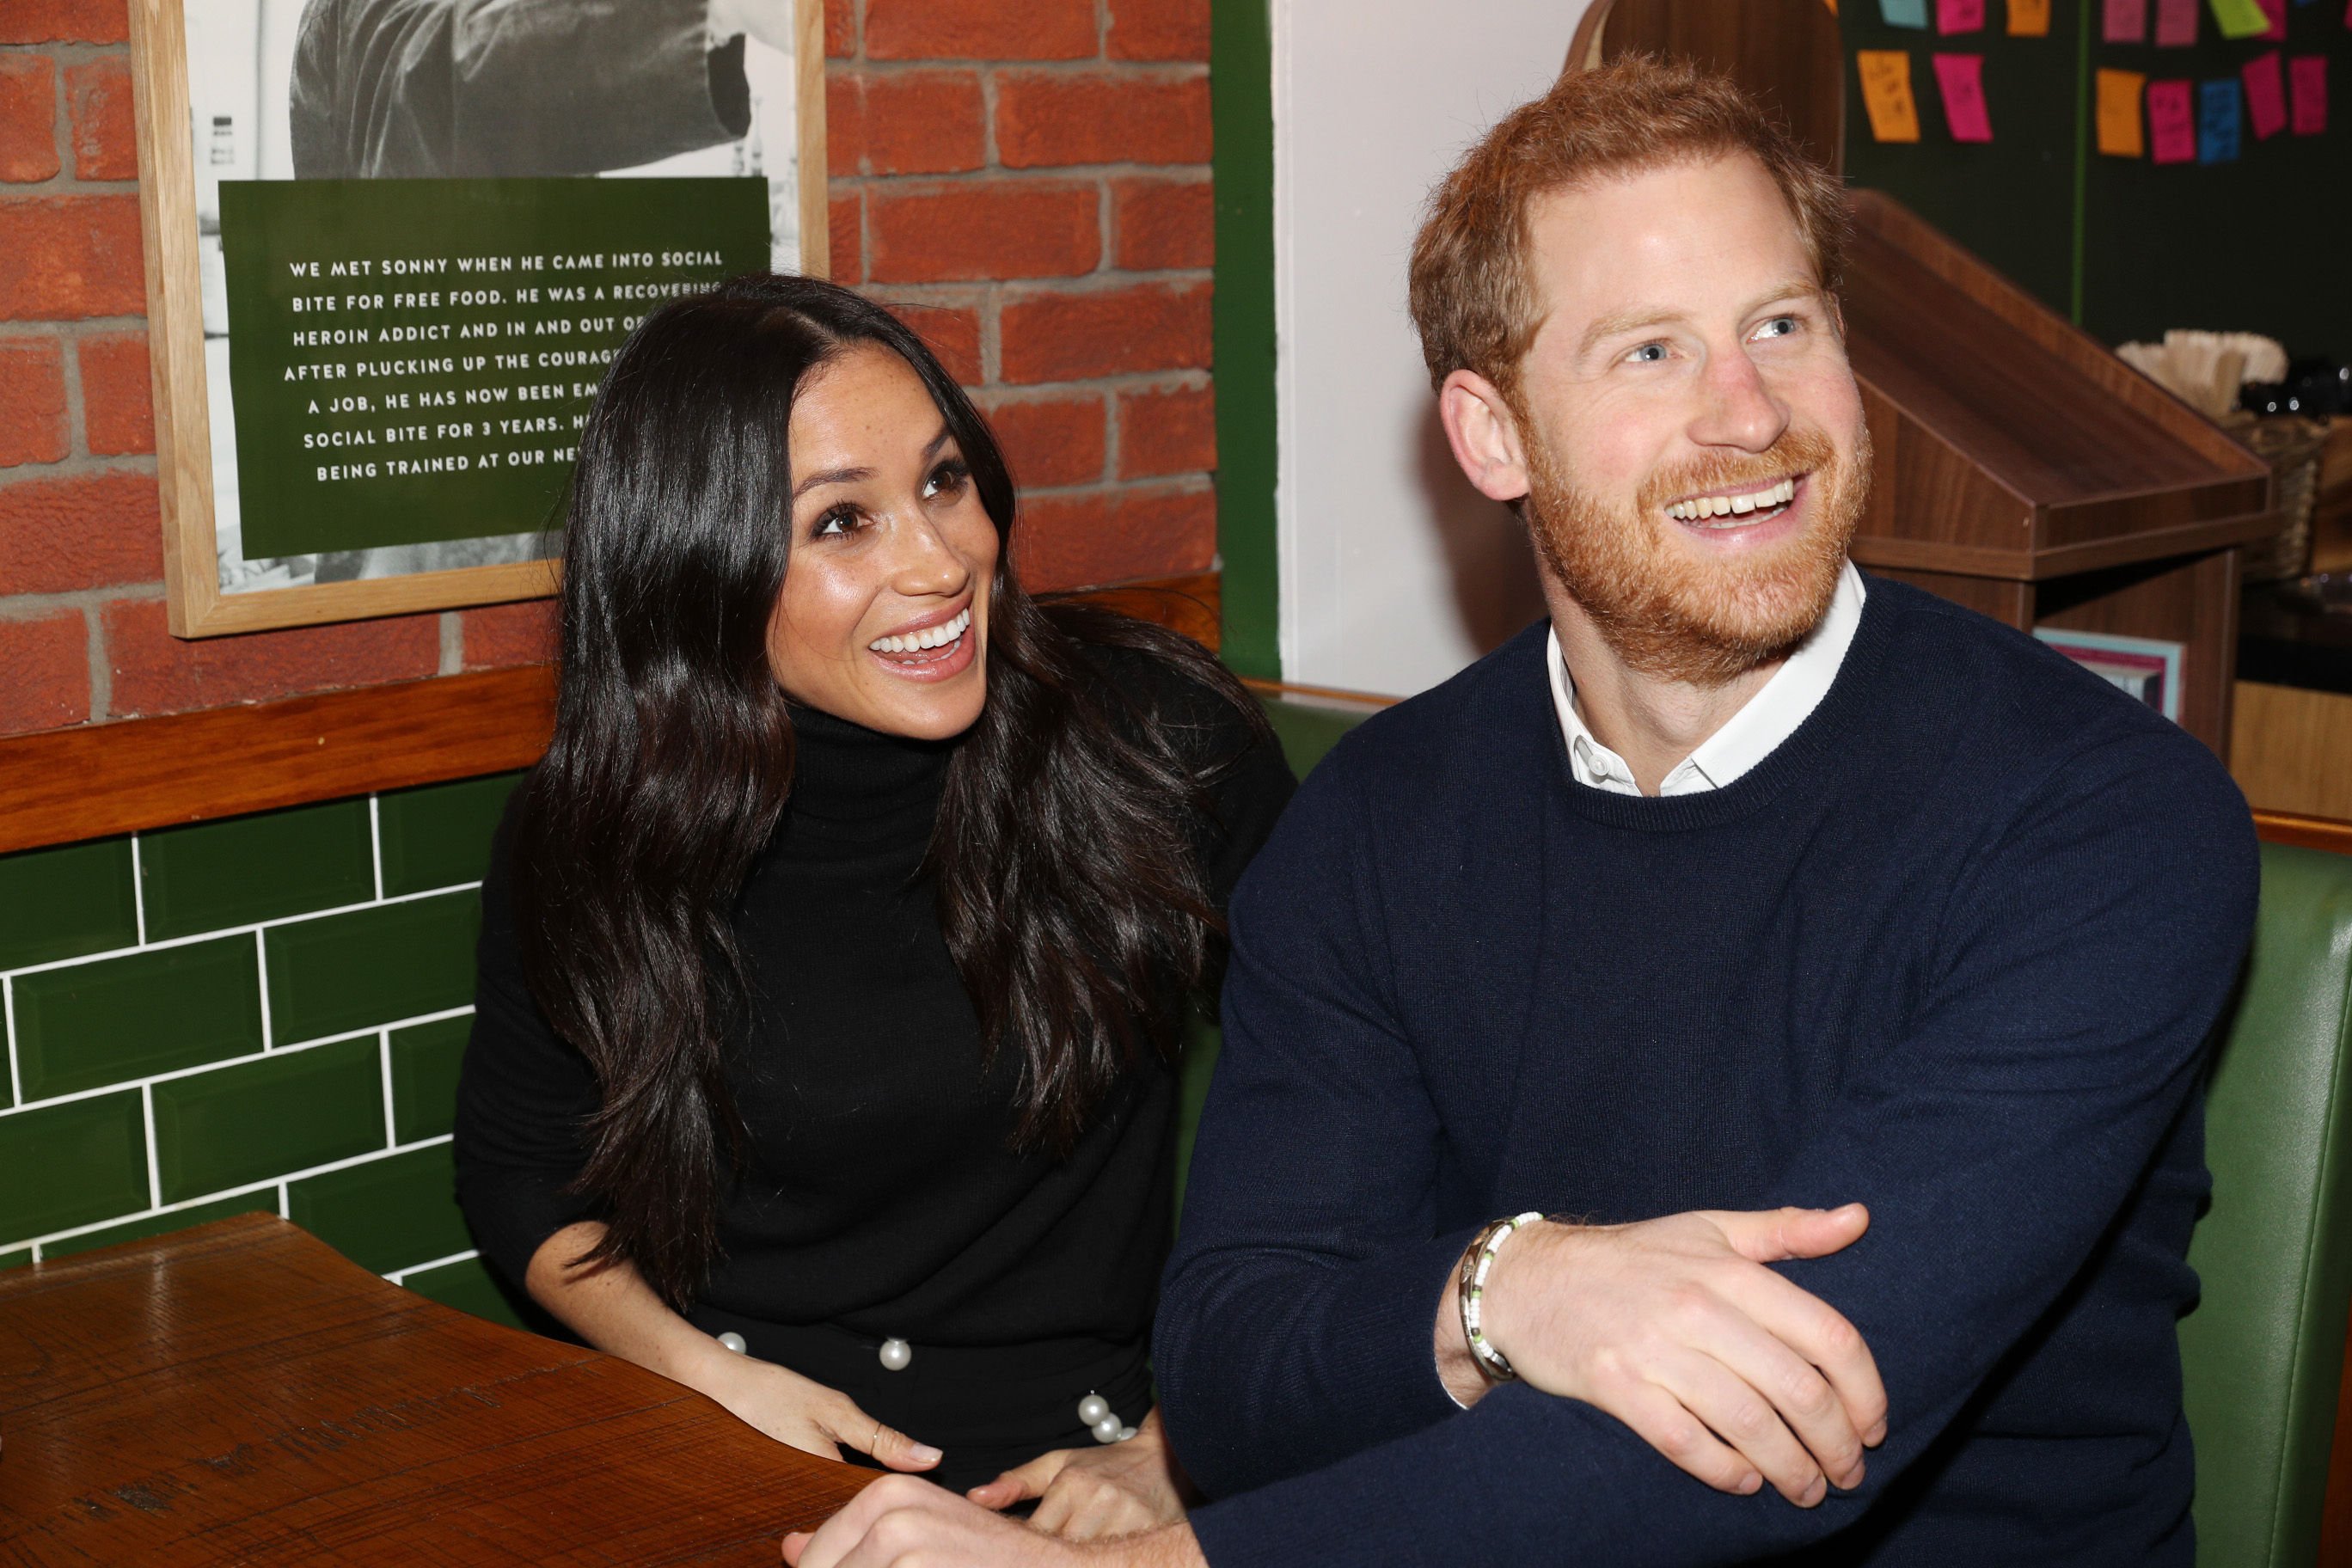 Meghan Markle and Prince Harry smile while sitting in a both during their visit to Social Bite on February 13, 2018 in Edinburgh, Scotland.